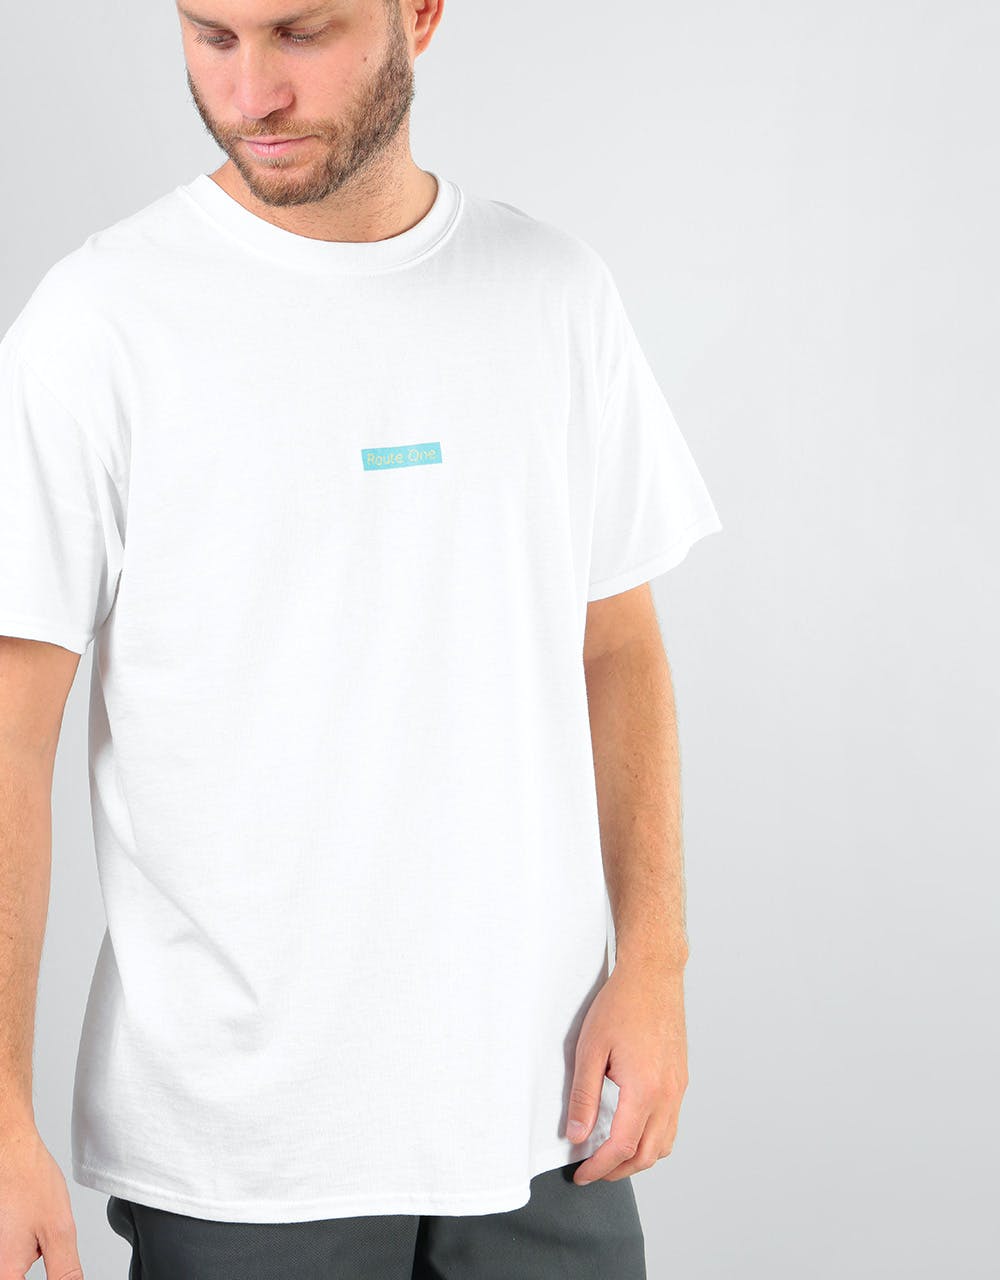 Route One Pool Party T-Shirt - White